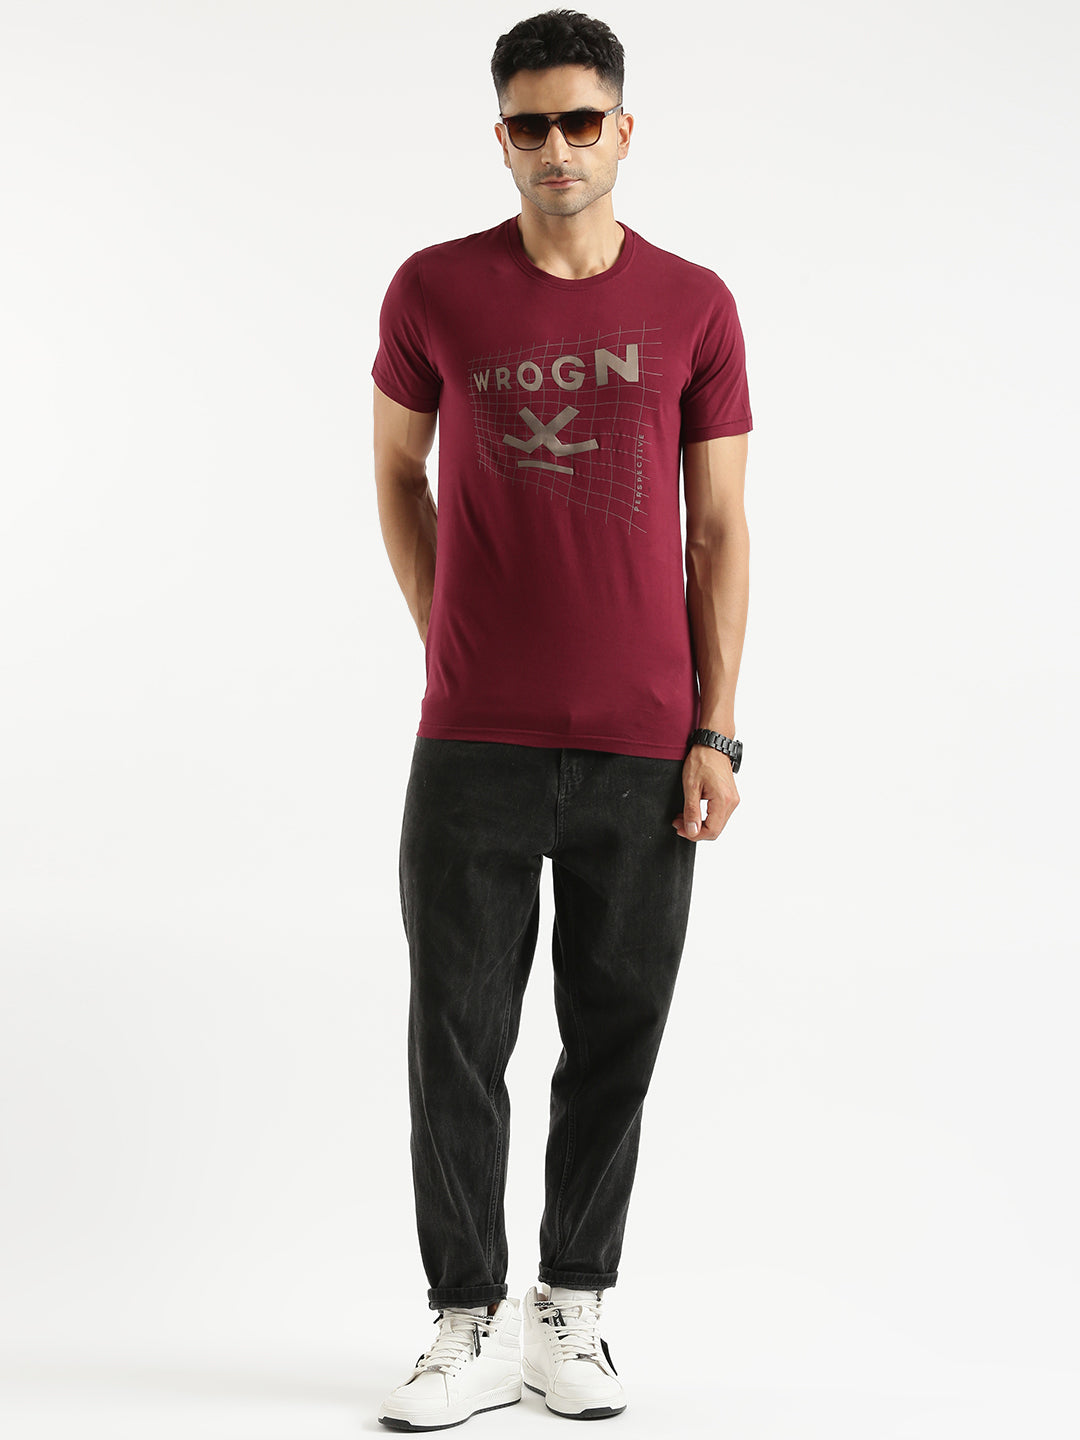 Wrogn Perspective Printed Bold T-shirt